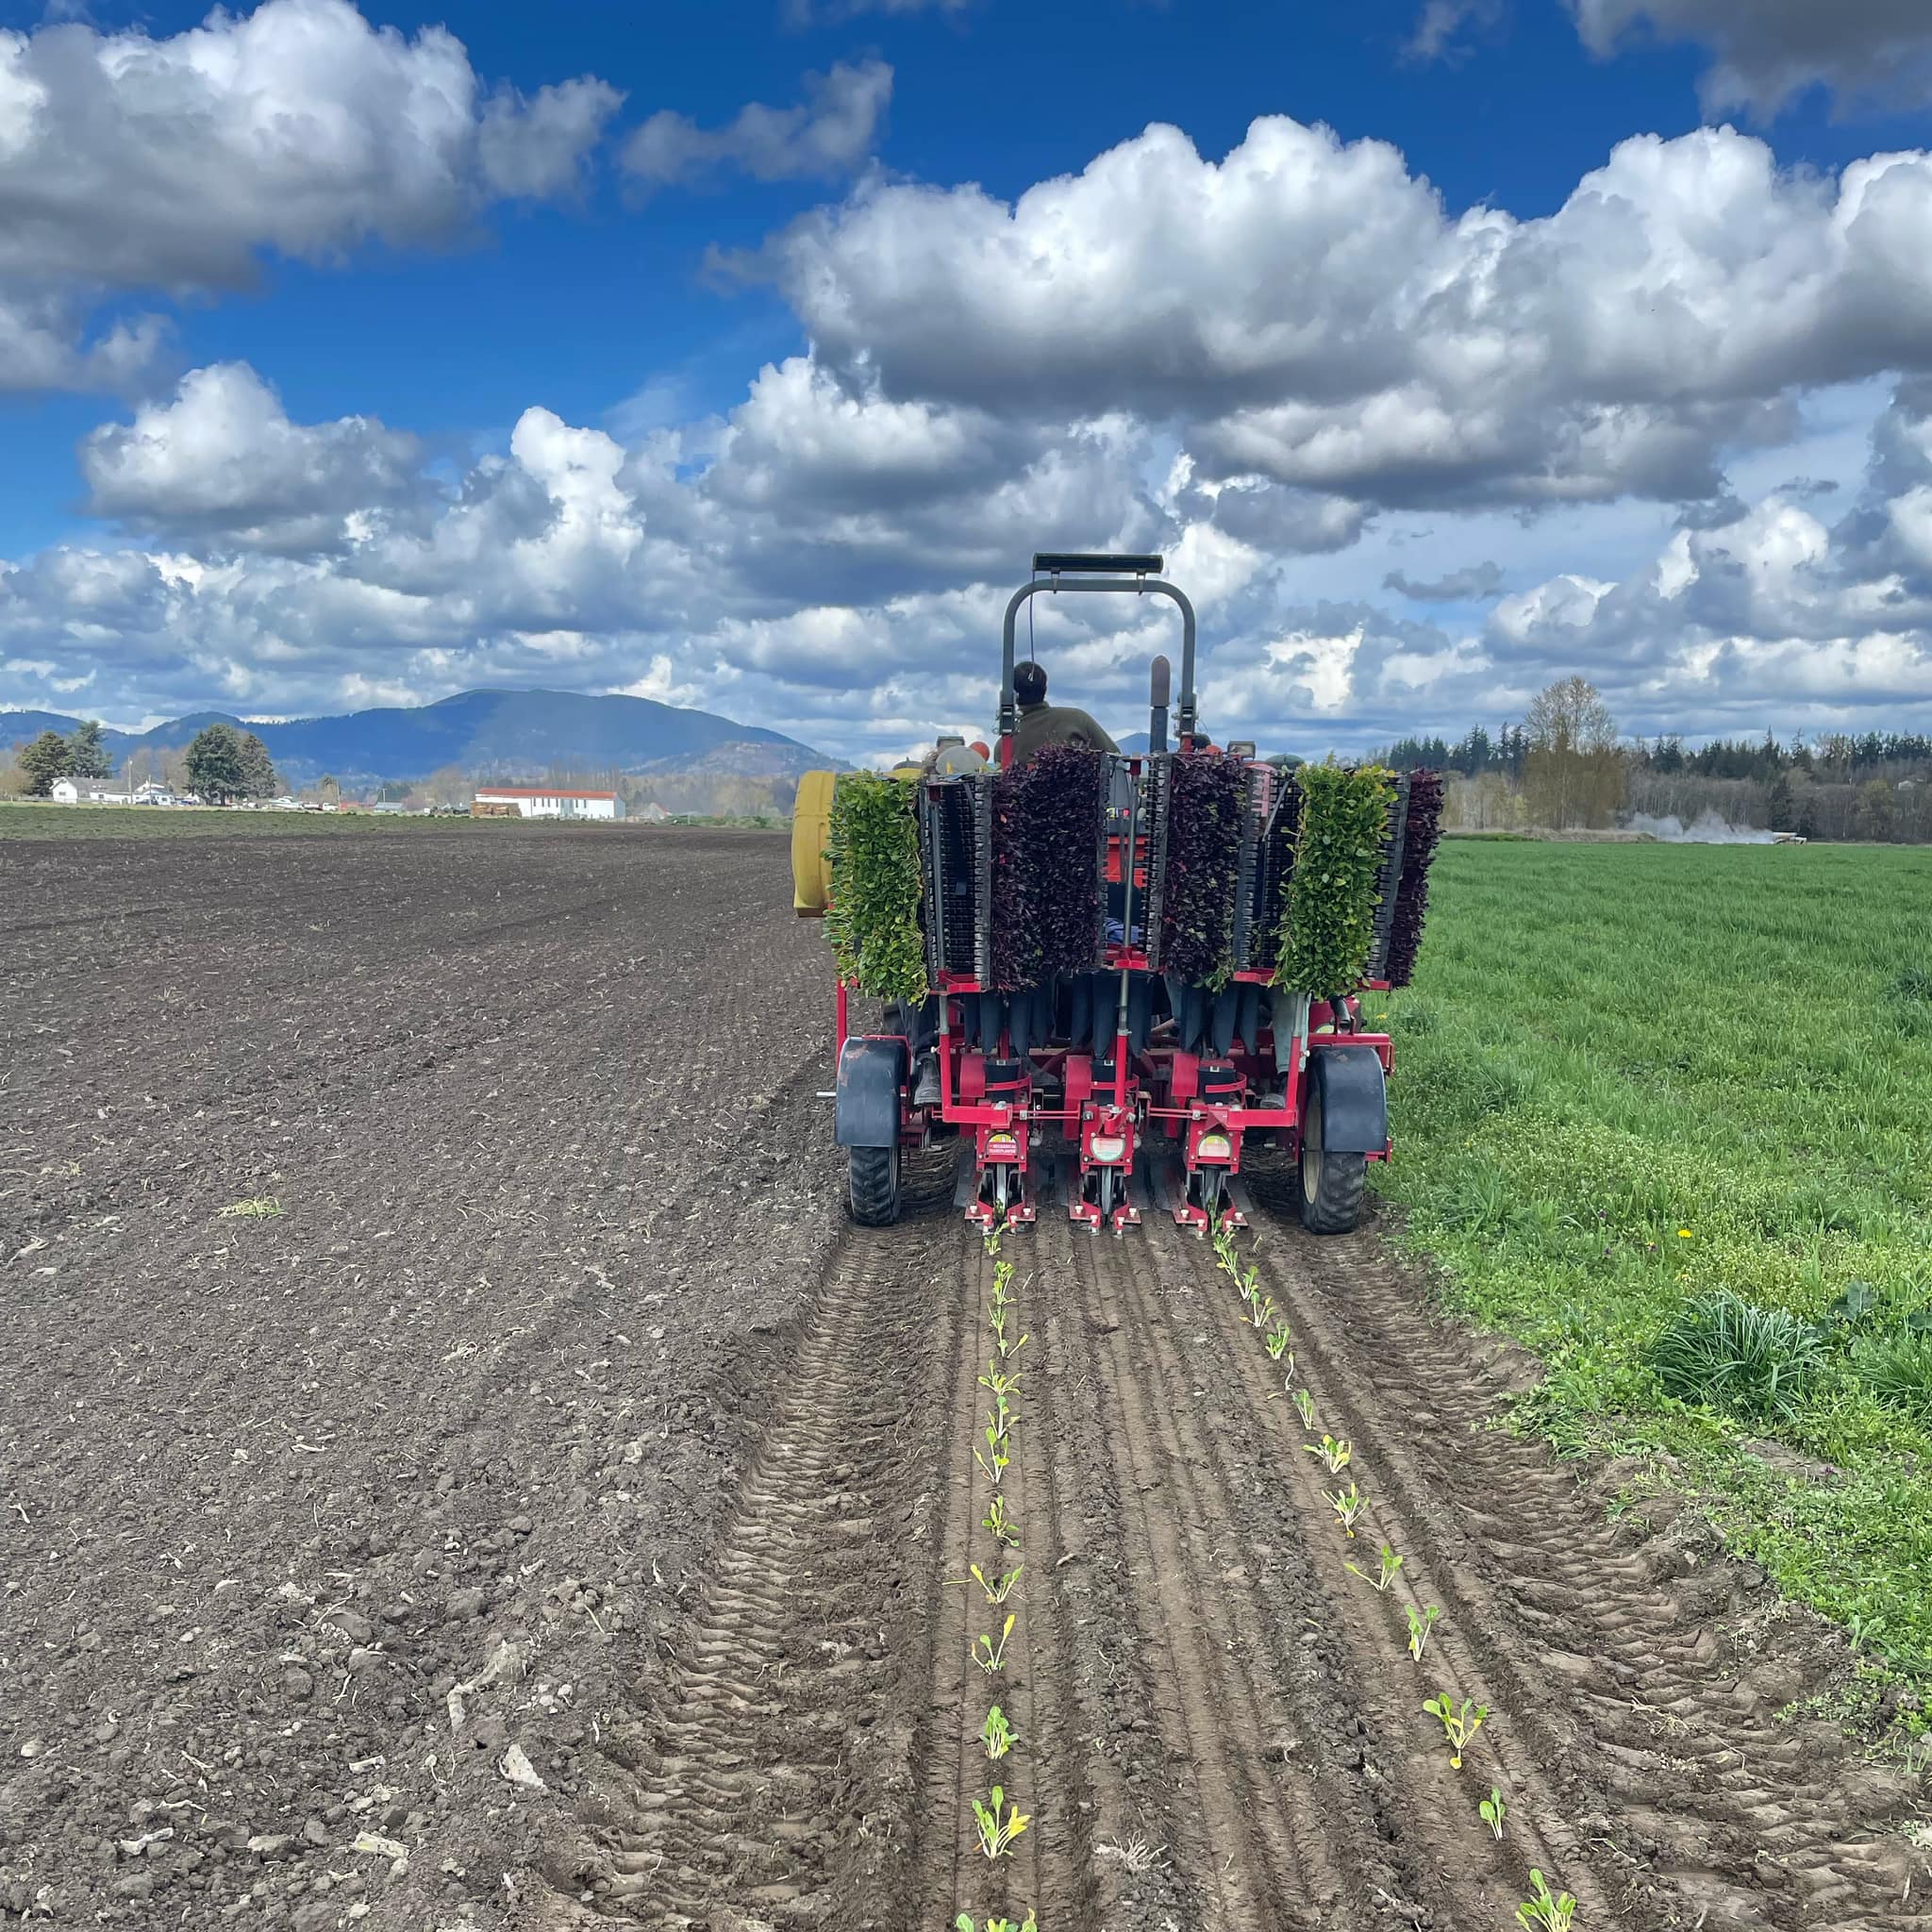 Spring planting at Boldly Grown Farm in Bow, WA